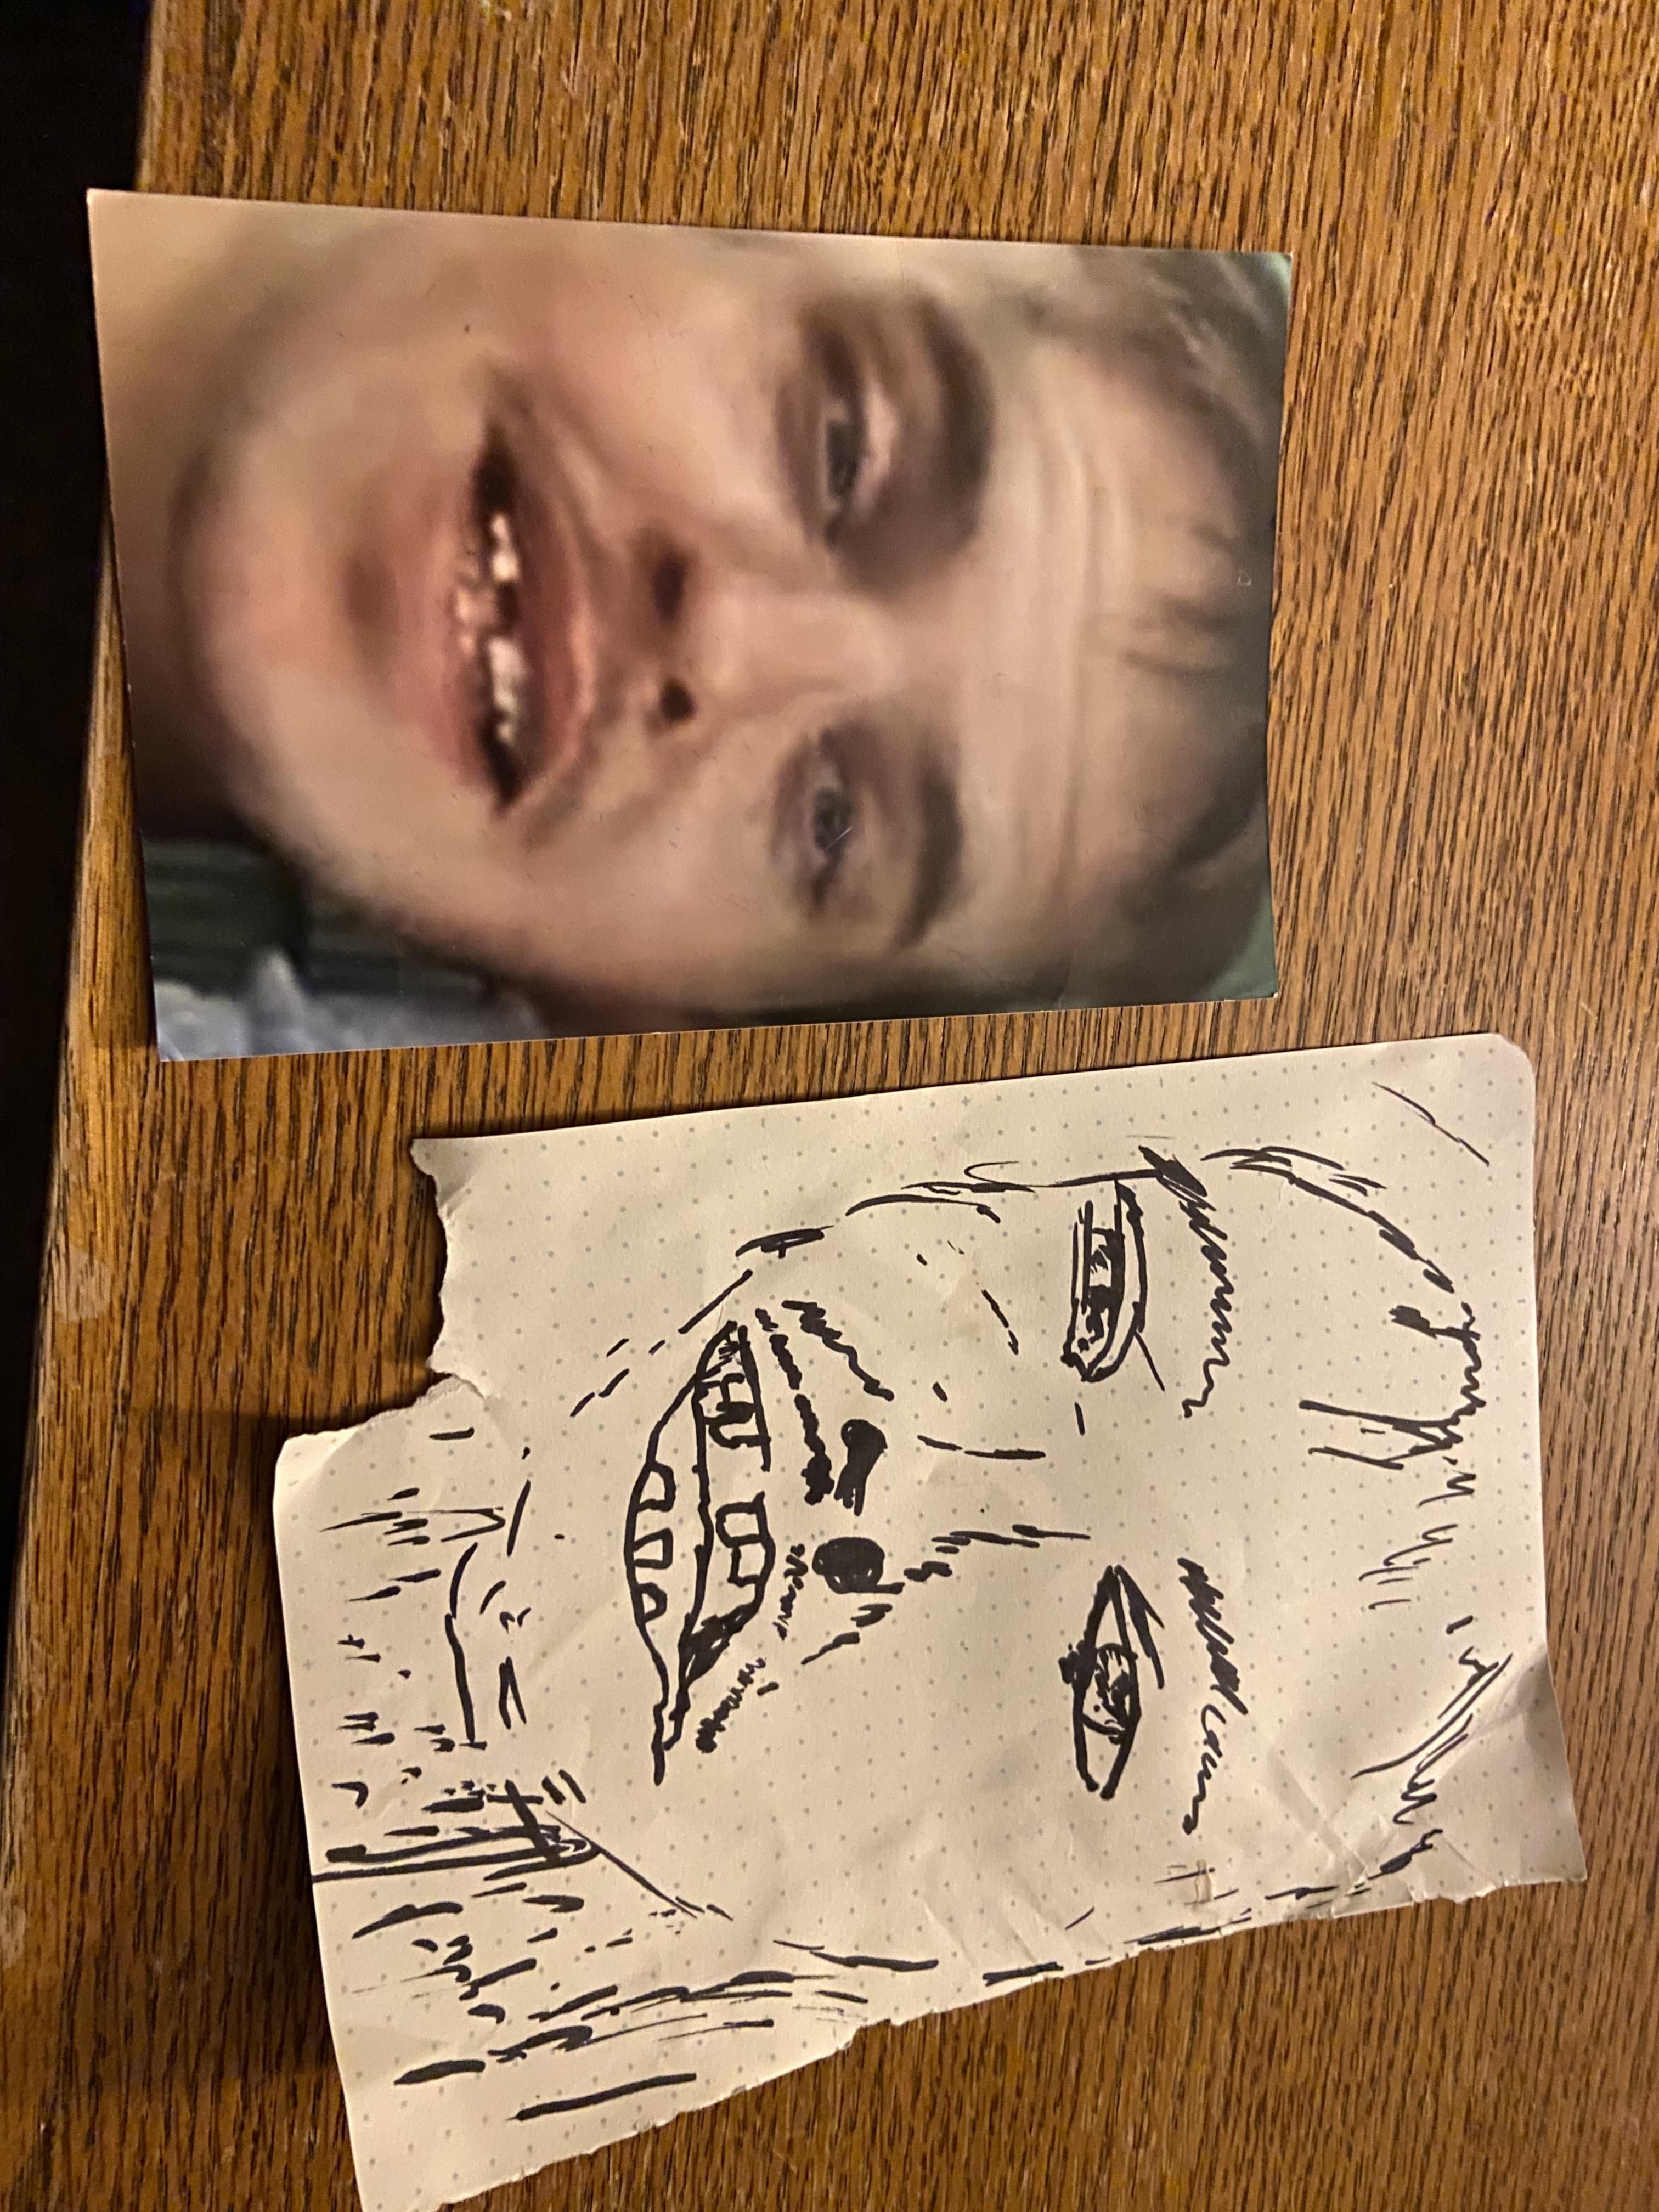 Need some honest opinion on a rough draft of a portrait I made. This is my first drawing doing a portrait of my nephew.